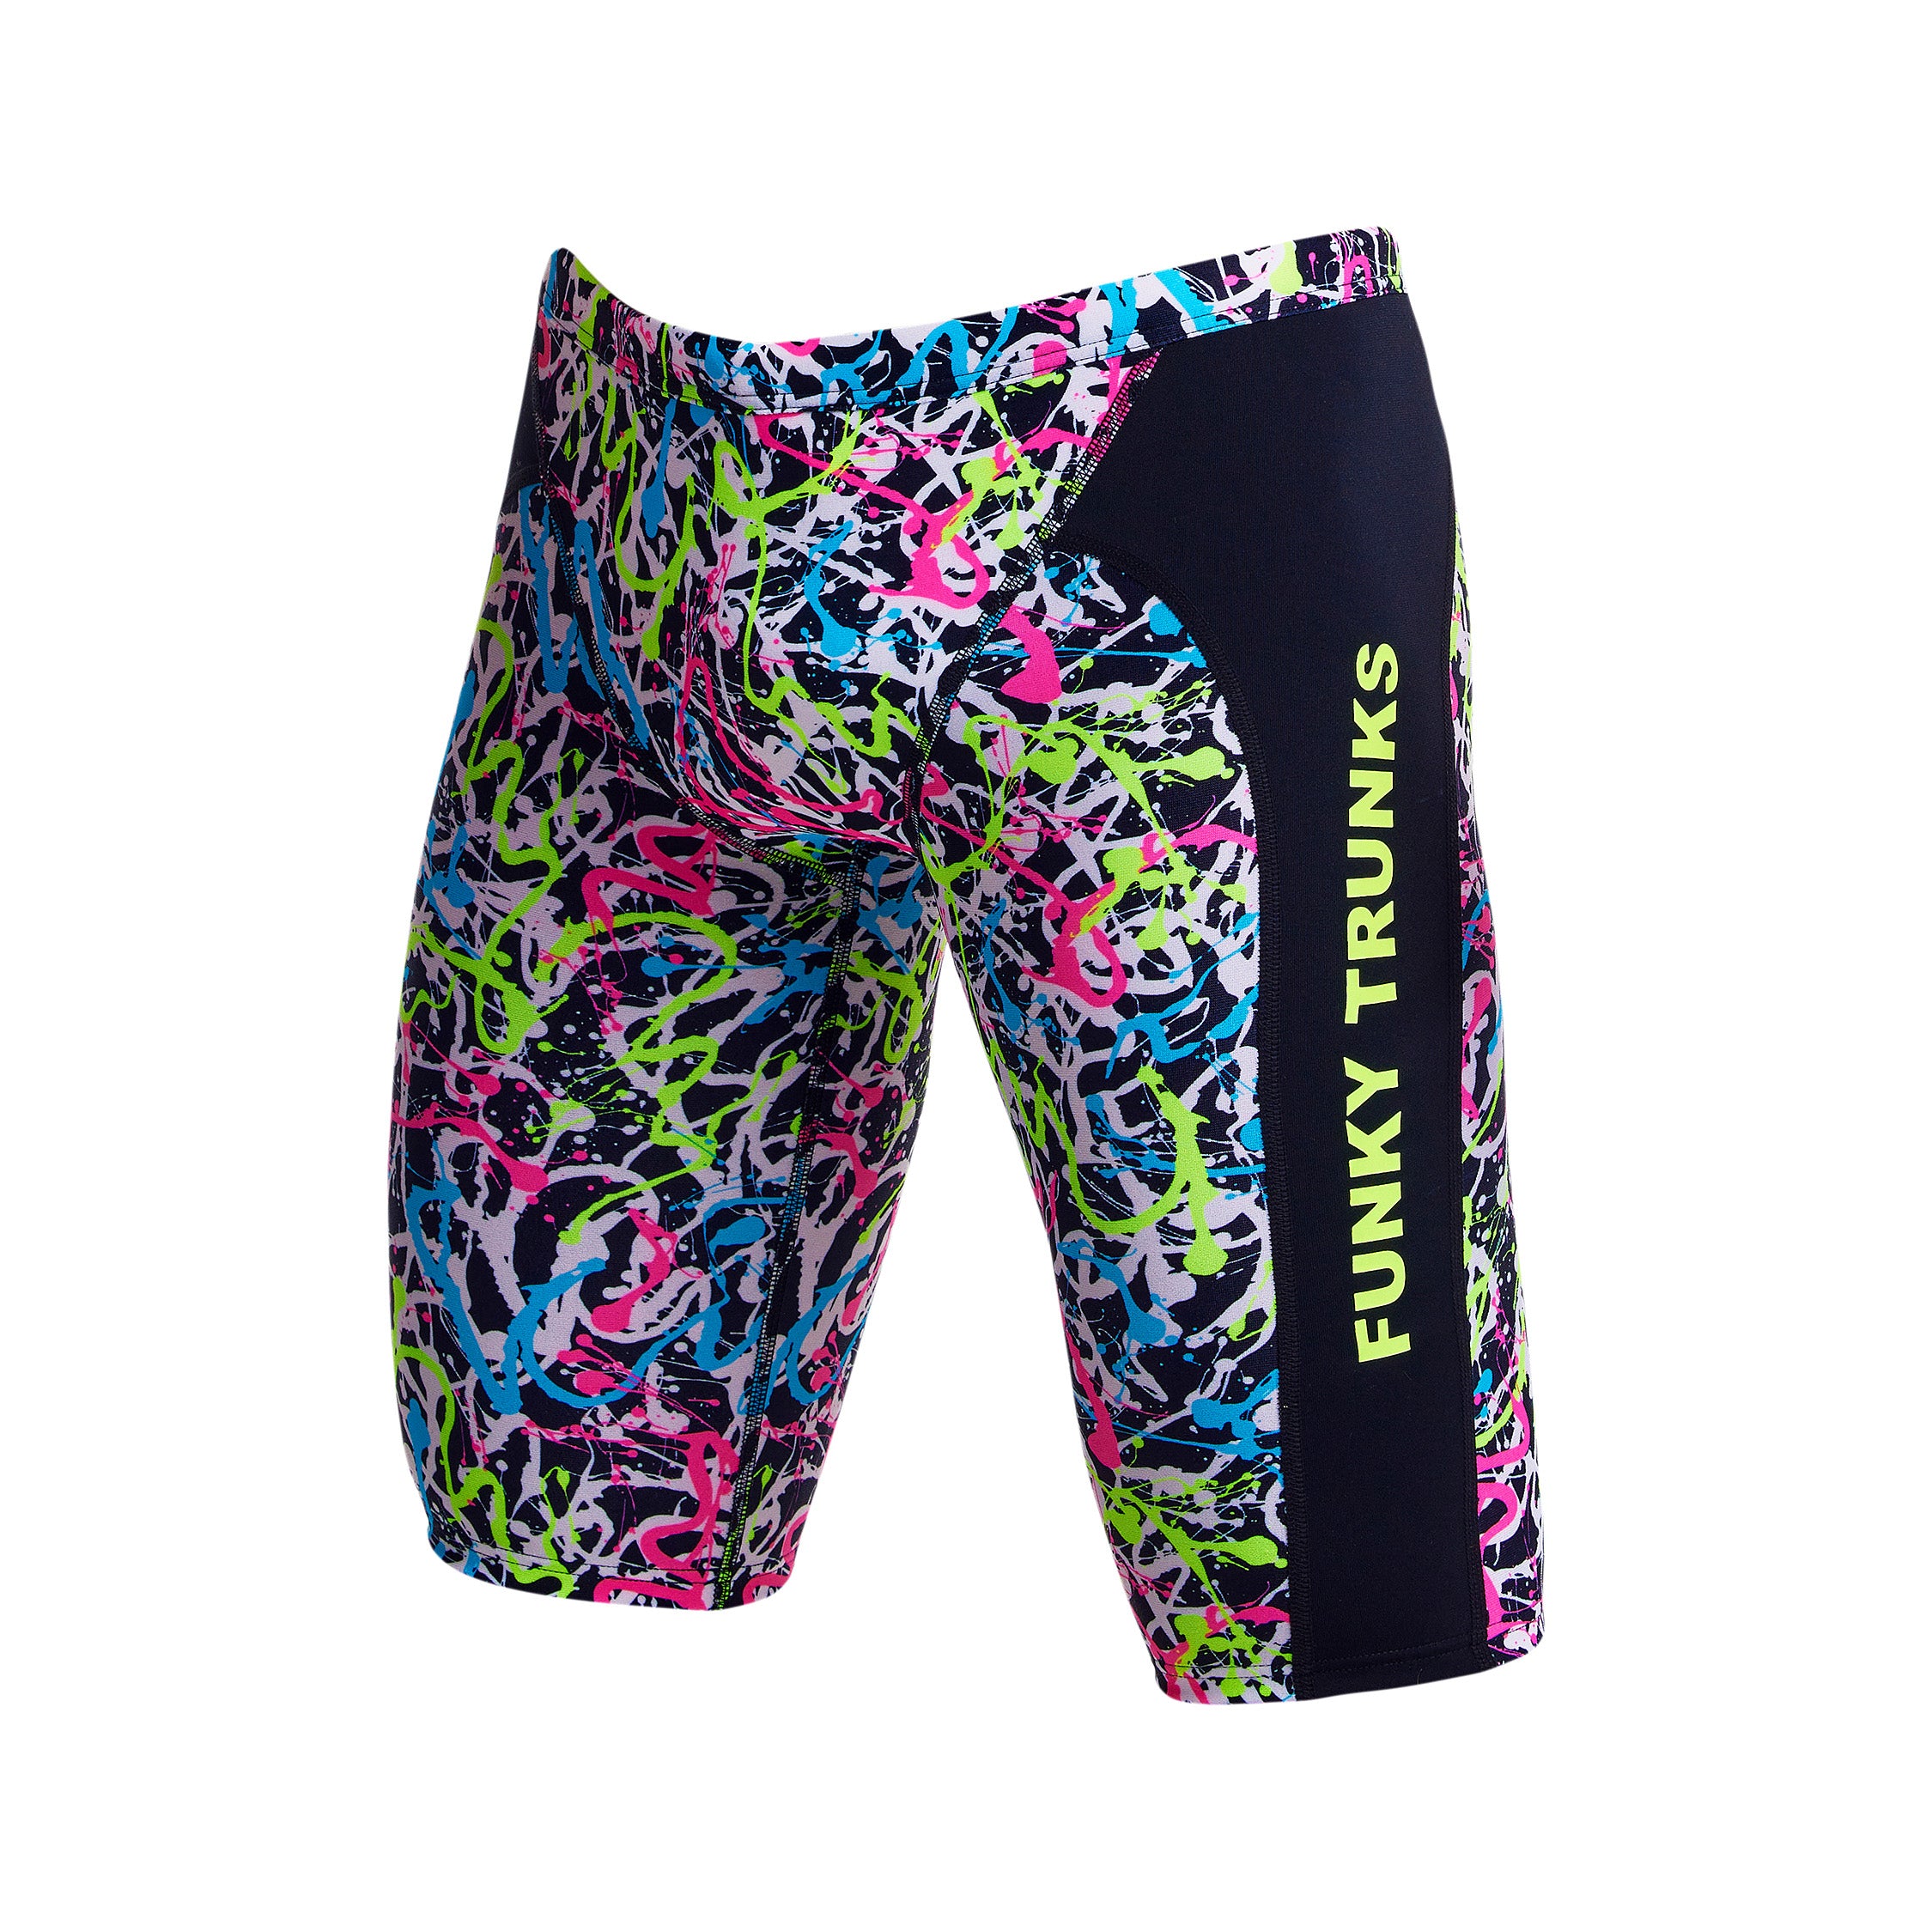 Way Funky, Mother Funky, Funky Trunks Men's Training Jammers Messed Up, Badehose, Herren